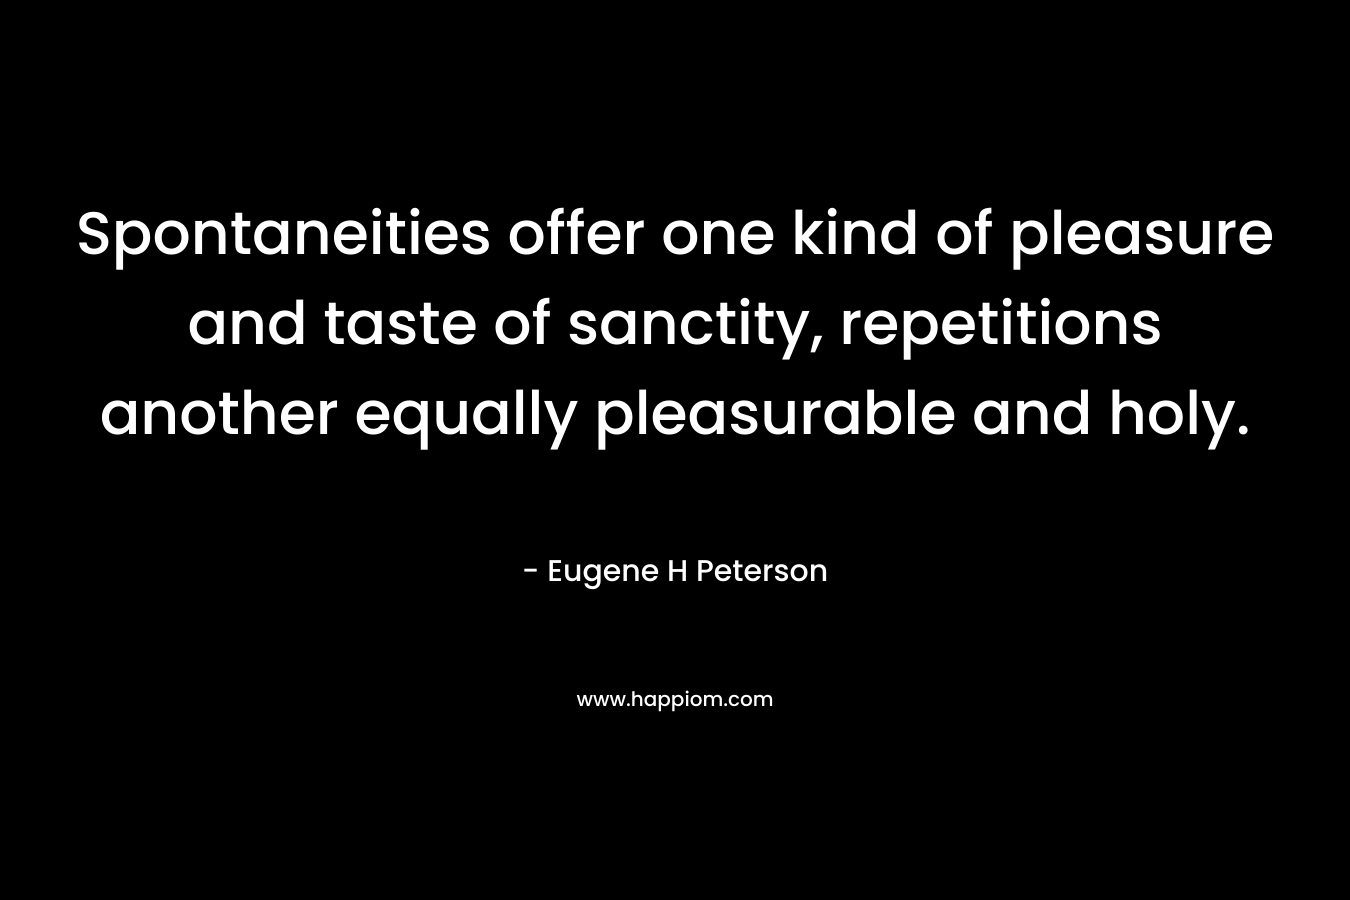 Spontaneities offer one kind of pleasure and taste of sanctity, repetitions another equally pleasurable and holy. – Eugene H Peterson